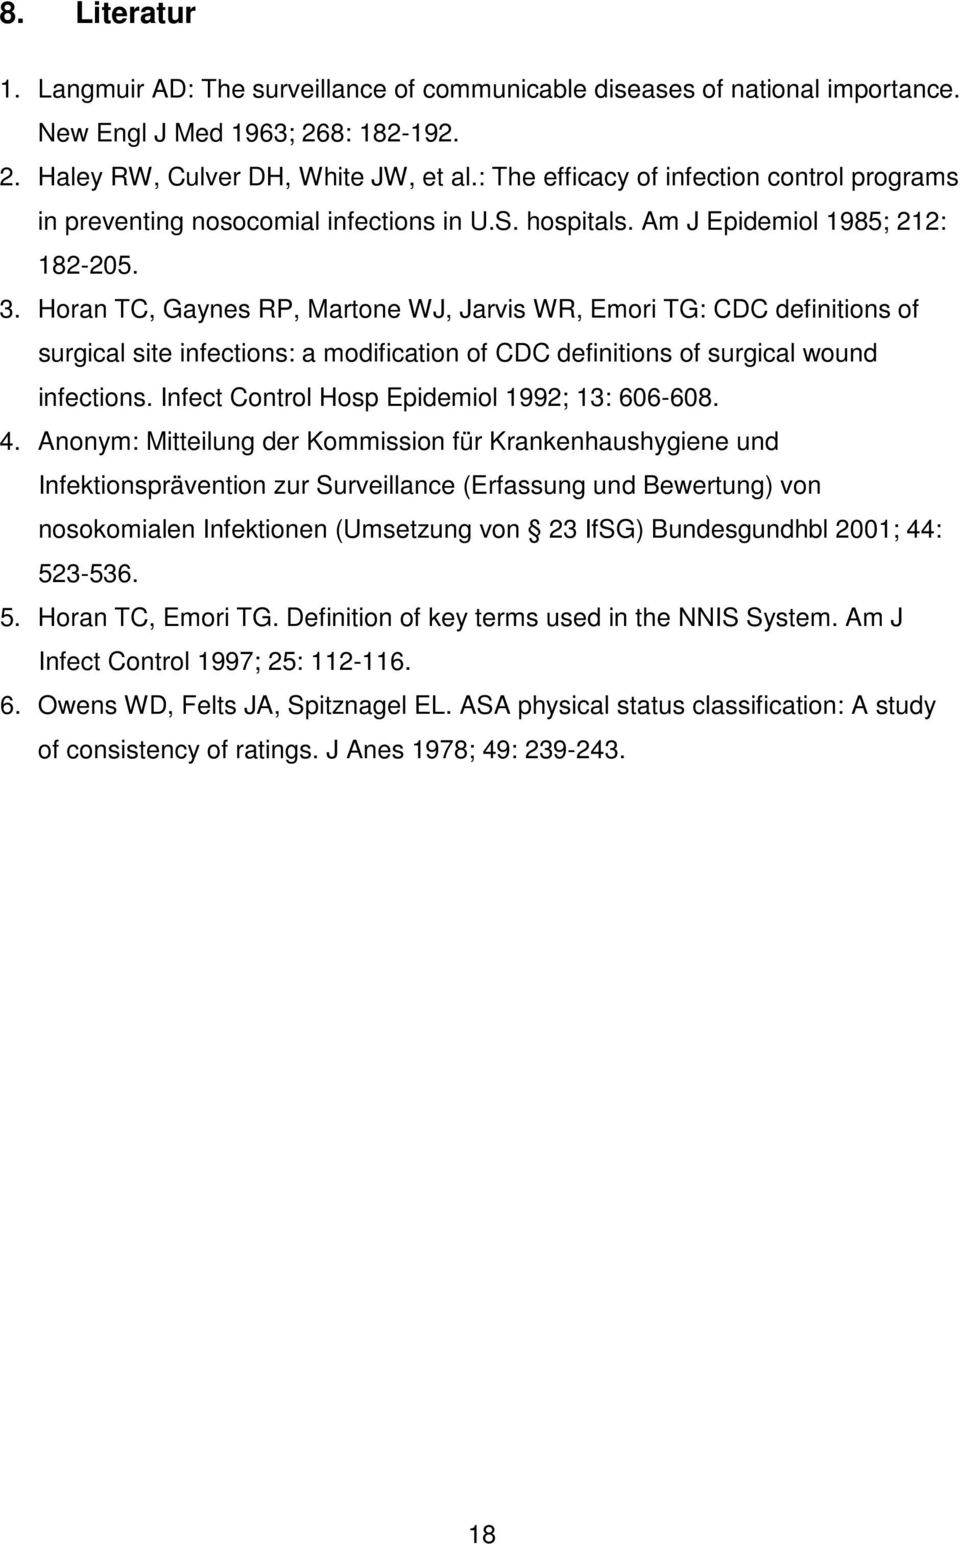 Horan TC, Gaynes RP, Martone WJ, Jarvis WR, Emori TG: CDC definitions of surgical site infections: a modification of CDC definitions of surgical wound infections.